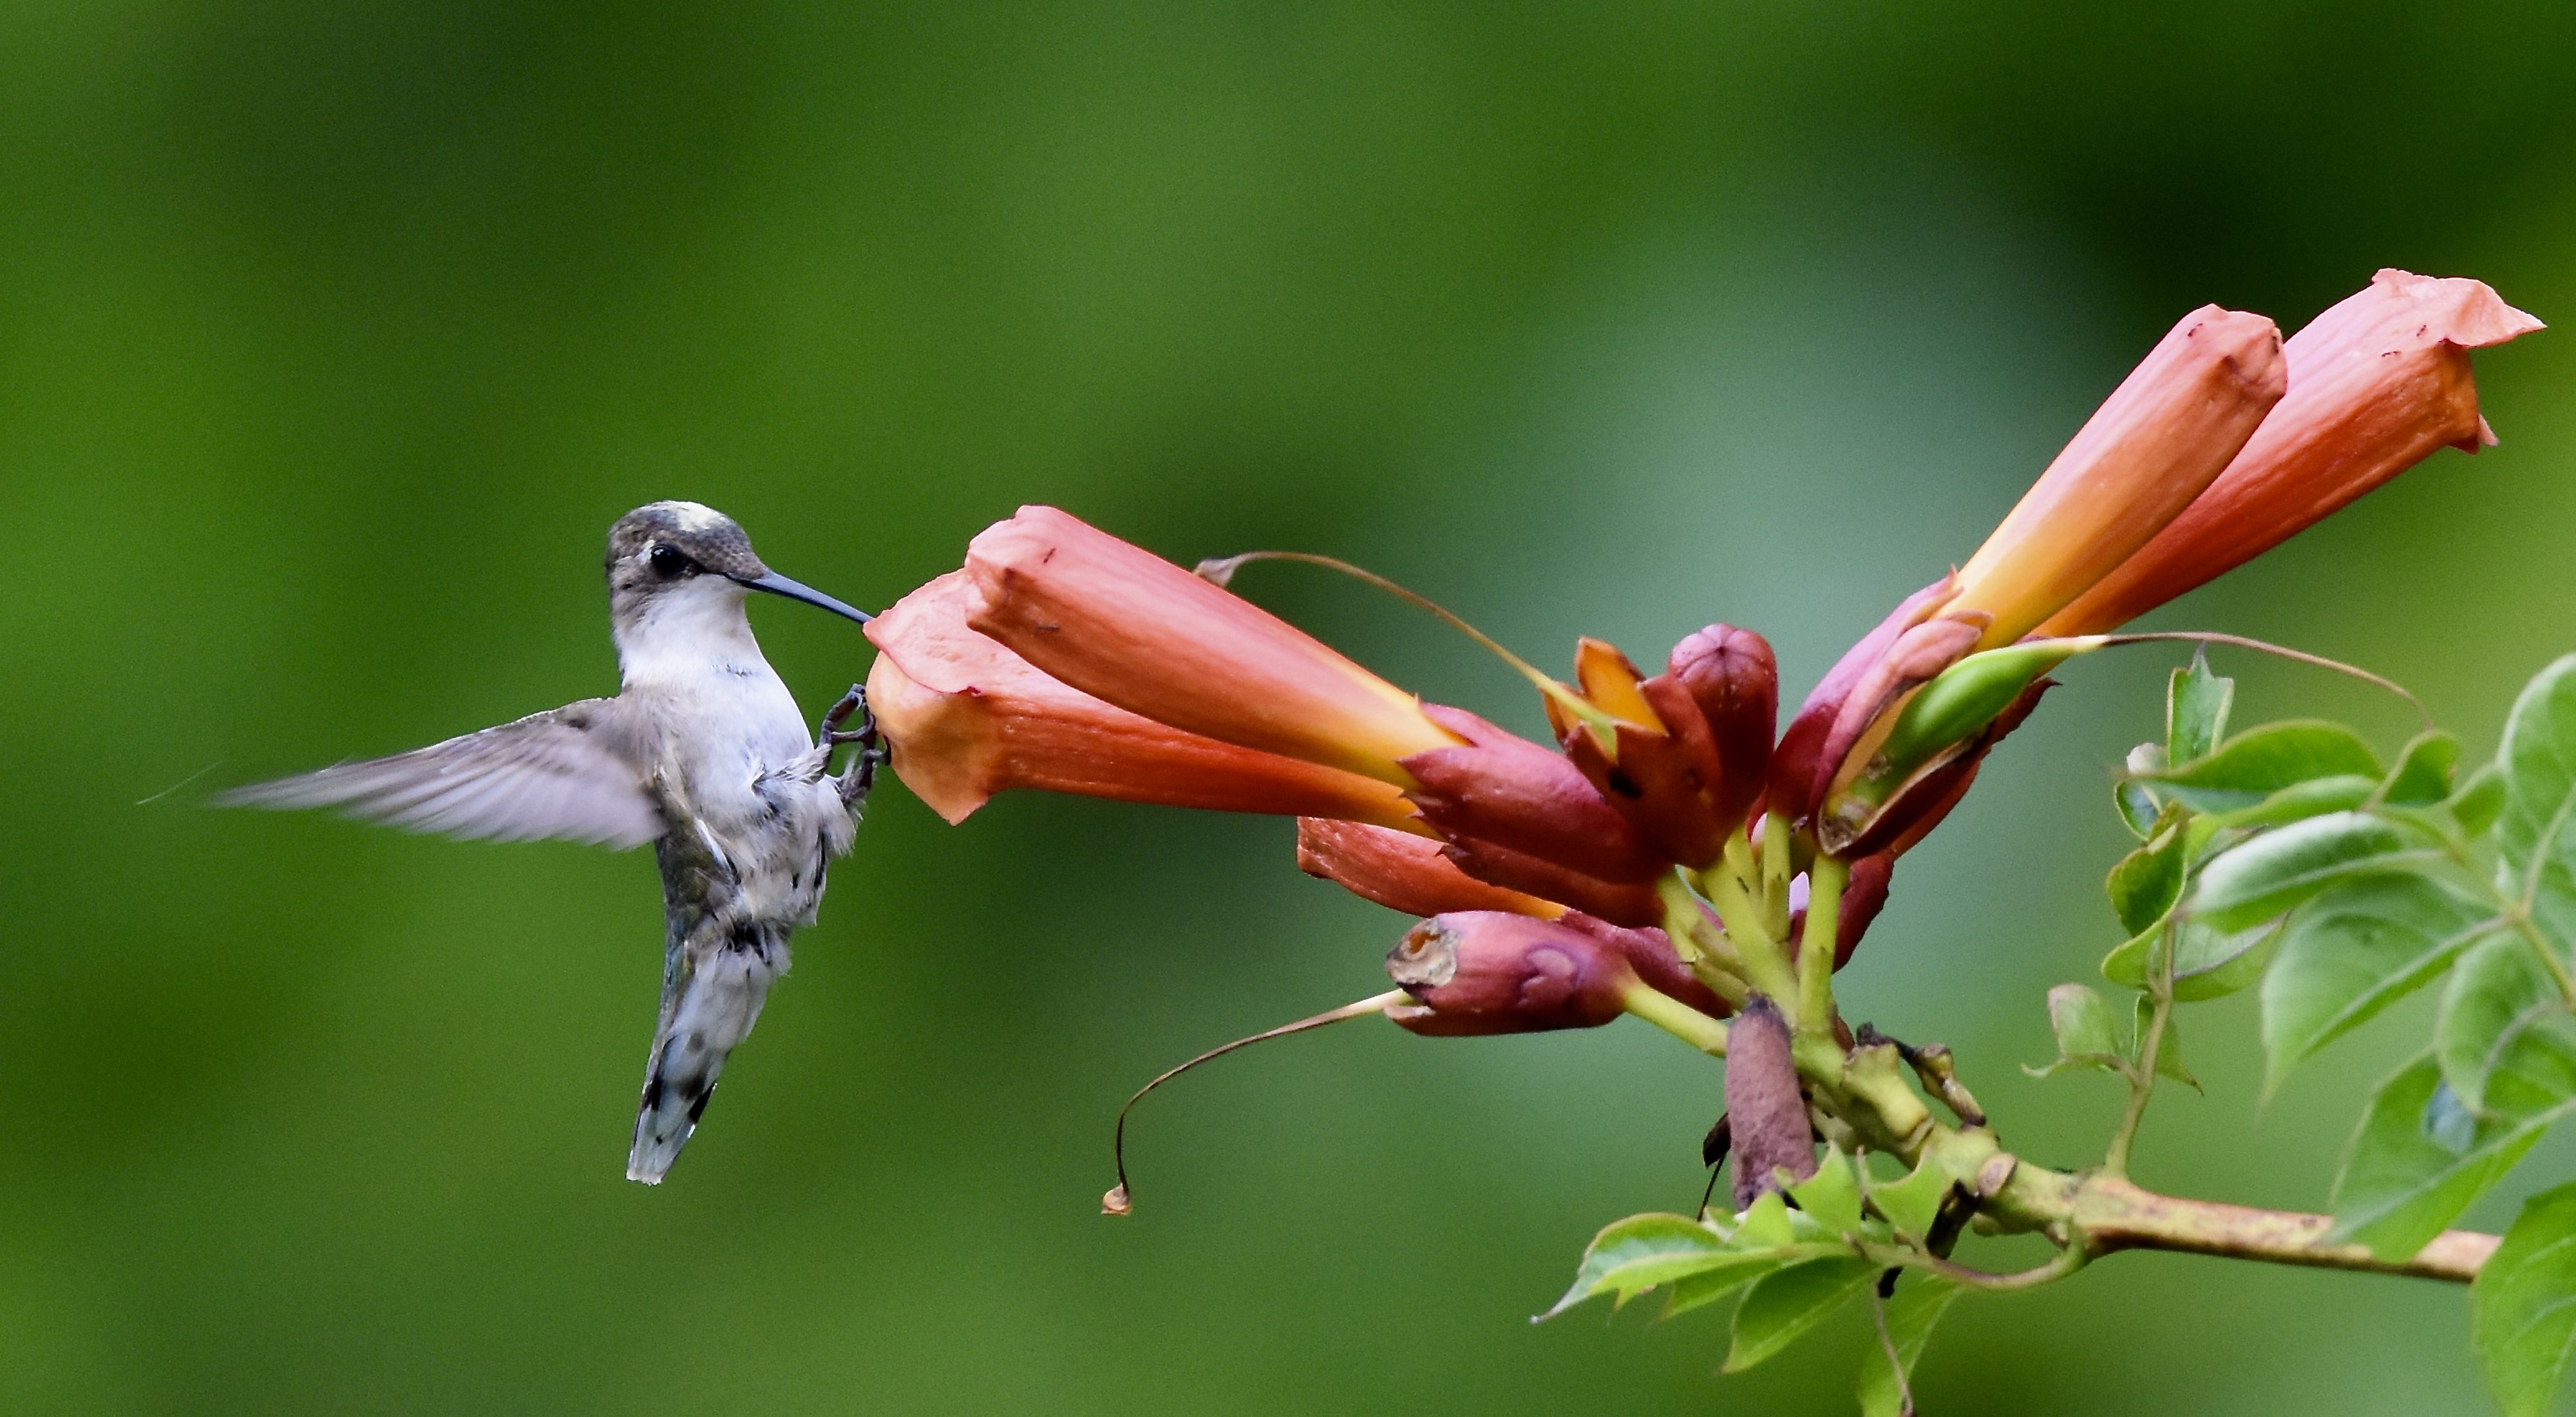 A hummingbird hovers at the edge of an orange, trumpet shaped flowers that extends out from a thin vine.